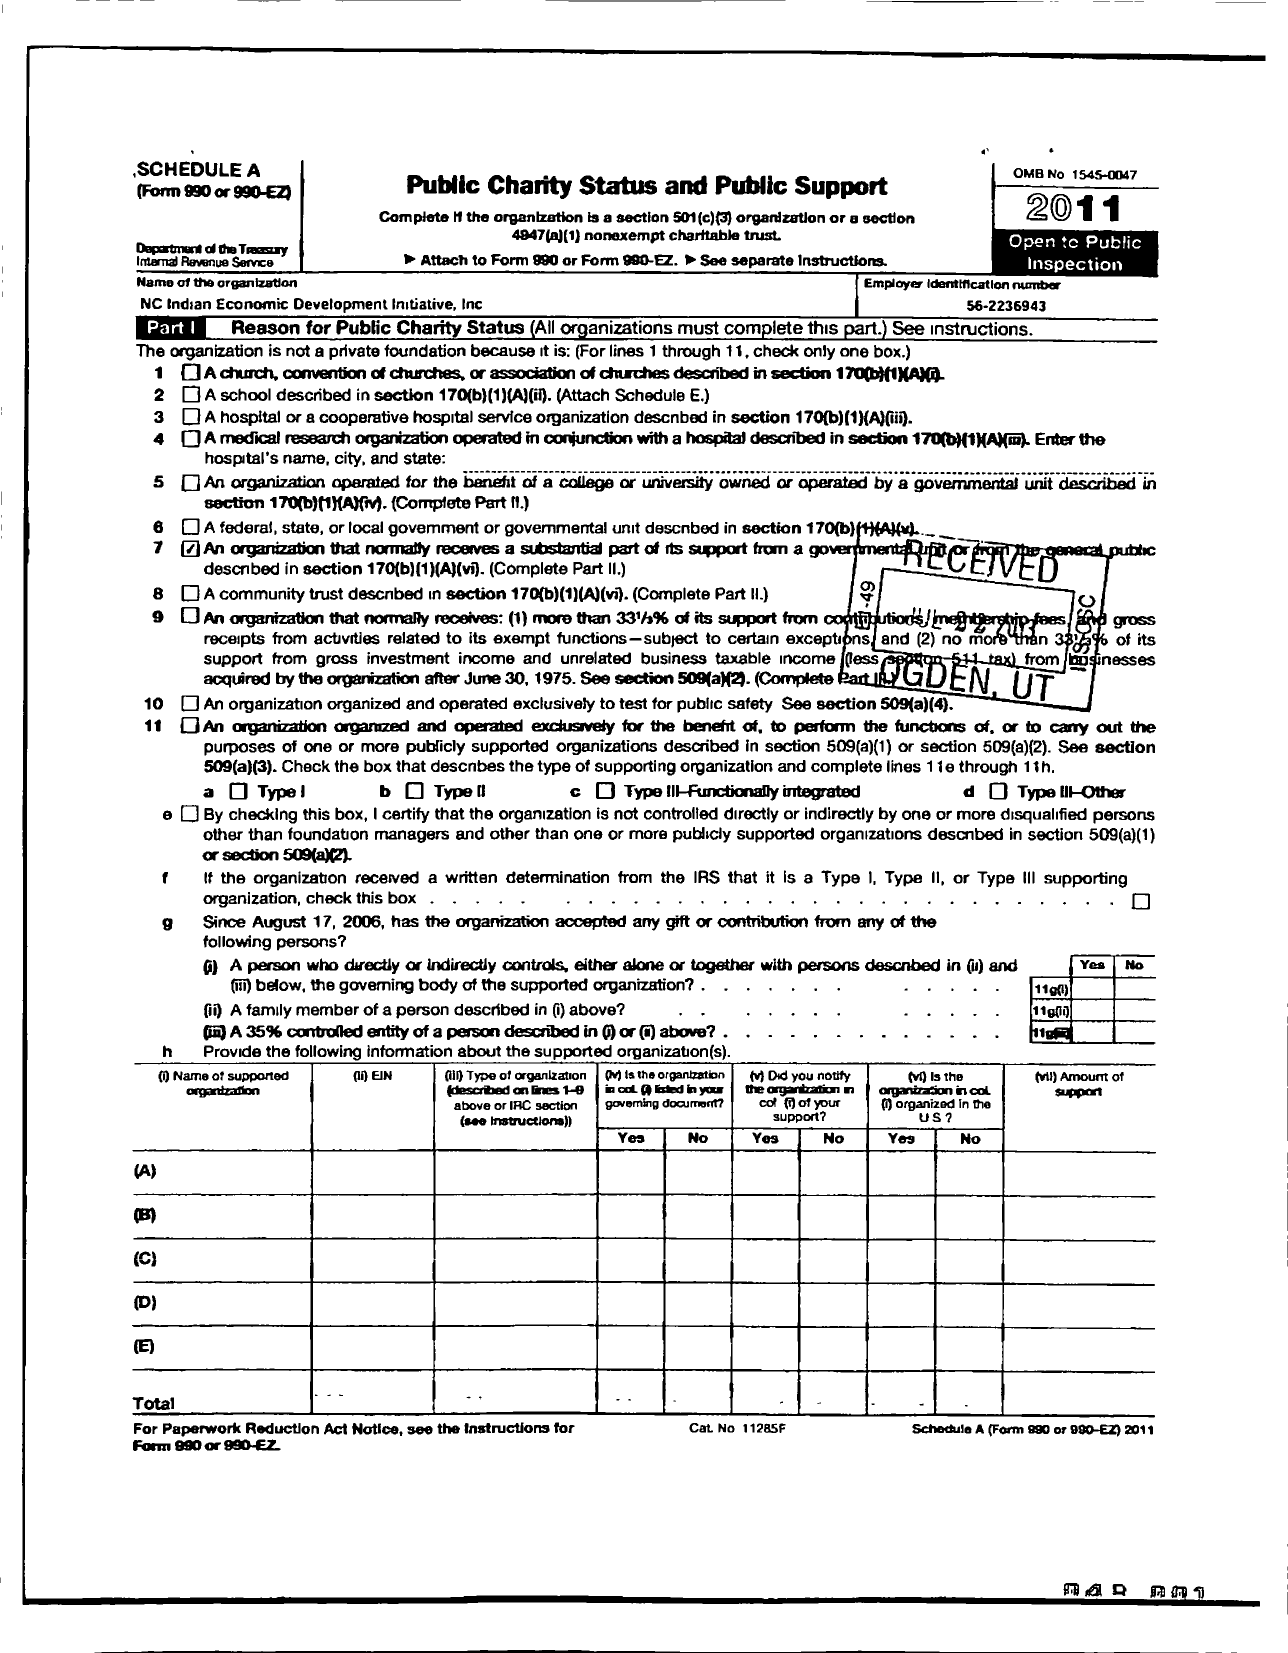 Image of first page of 2011 Form 990R for North Carolina Indian Economic Development Initiative